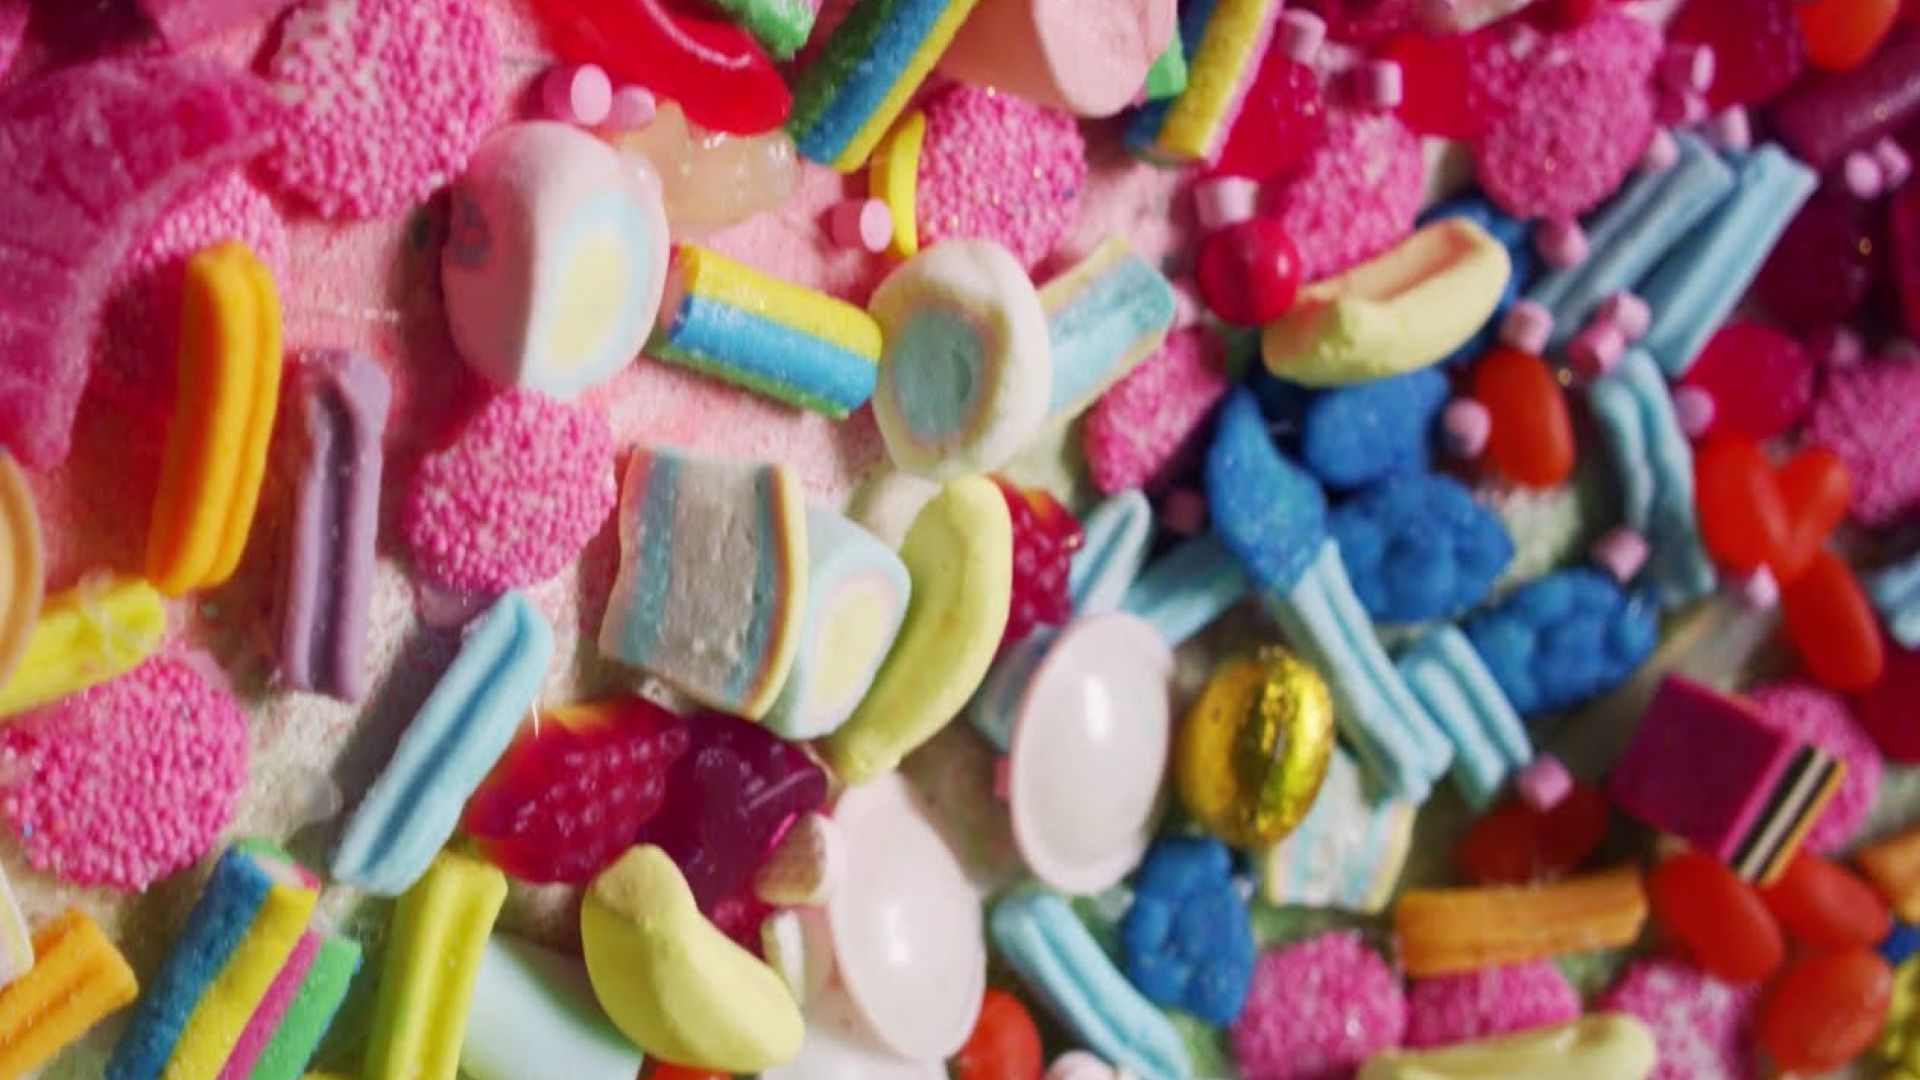 Discover a Sweeter Life in First Trailer for Documentary &#039;Th